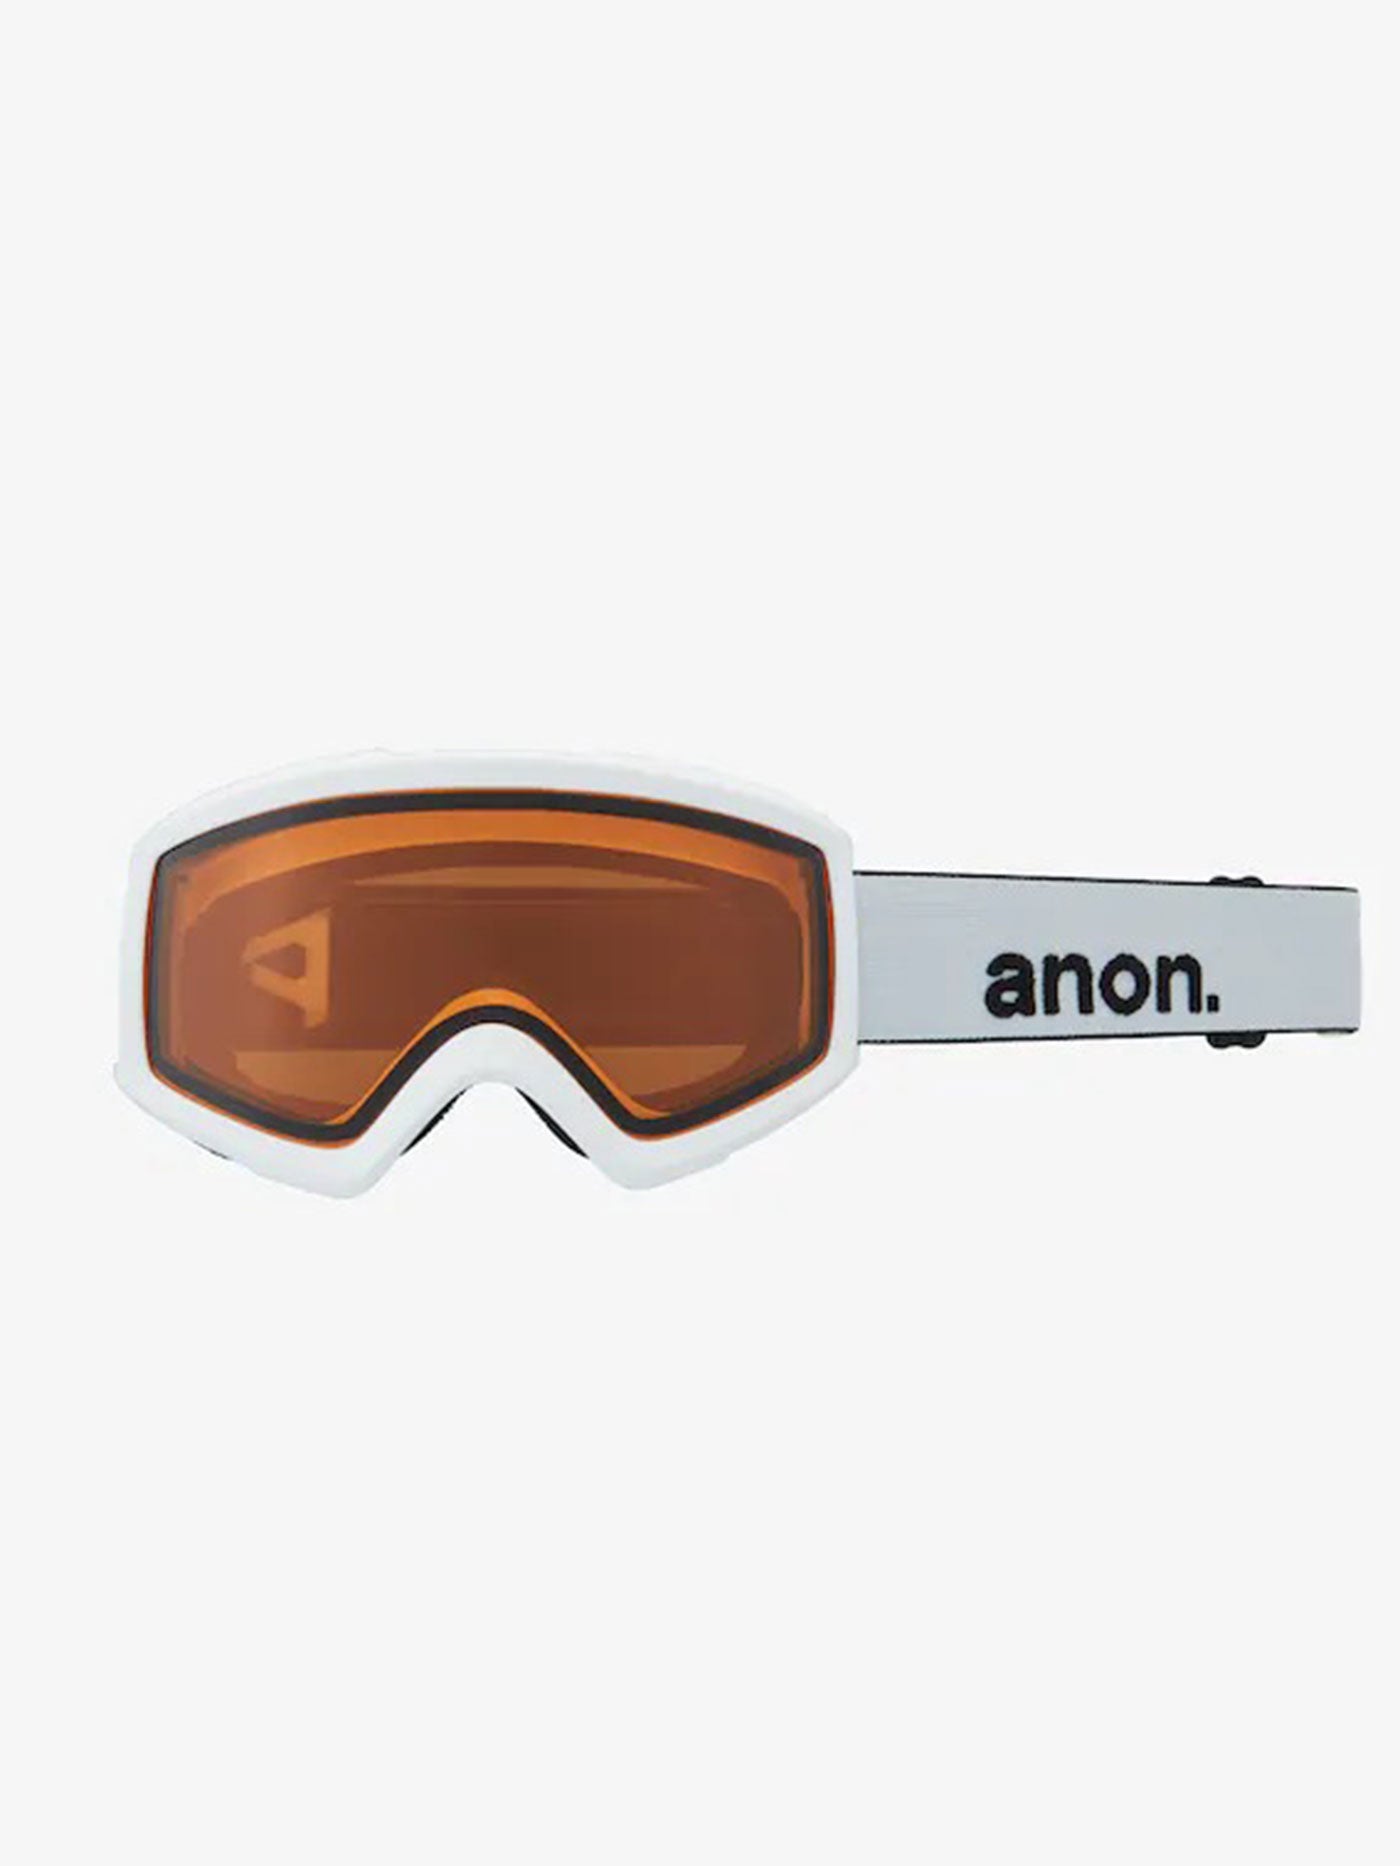 Anon Goggle Helix 2.0 + Spare Lens